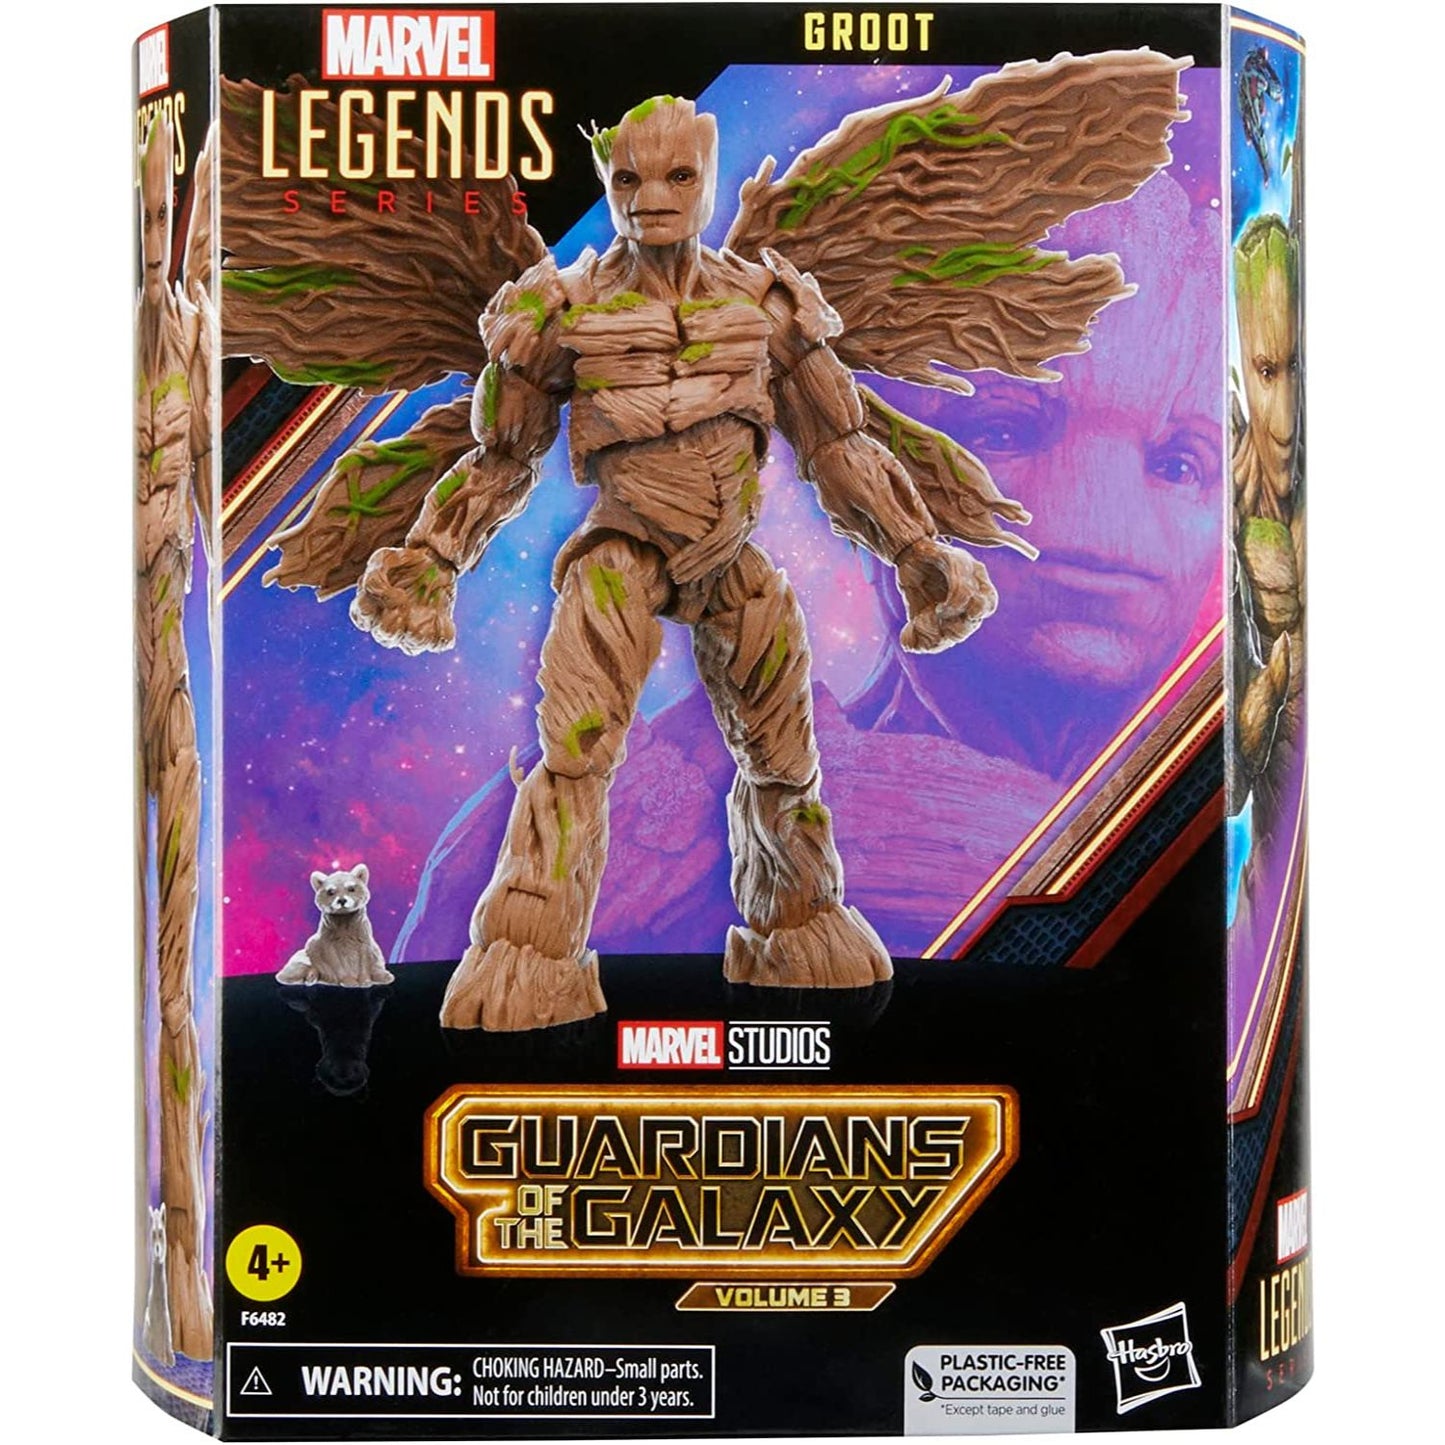 Guardians of the Galaxy Vol. 3 Marvel Legends Groot 6-Inch Action Figure In Box - Heretoserveyou